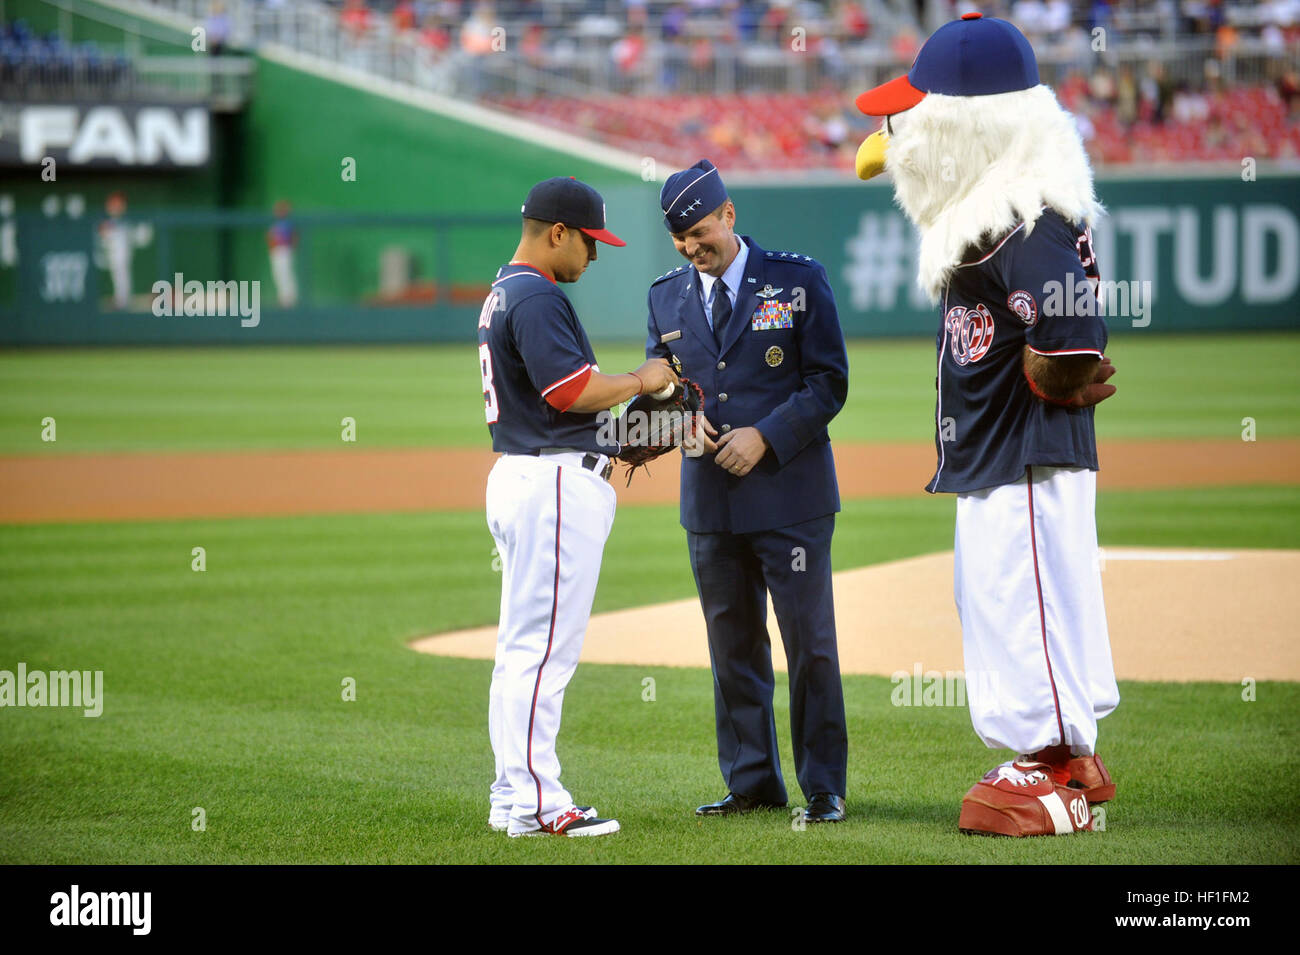 From left to right, Jhonatan Solano, a catcher for the Washington Nationals, U.S. Air Force Lt. Gen. Joseph Lengyel, the vice chief of the National Guard Bureau, and Screech the mascot take a moment during the Washington Nationals 9/11 Remembrance/Heroes Night at the Nationals Park, Washington, D.C., Sept. 13, 2013.  (U.S. Army National Guard photo by Sgt. 1st Class Jim Greenhill/Released) Nationals Sept. 11 Remembrance-Heroes Night 130913-Z-DZ751-220 Stock Photo